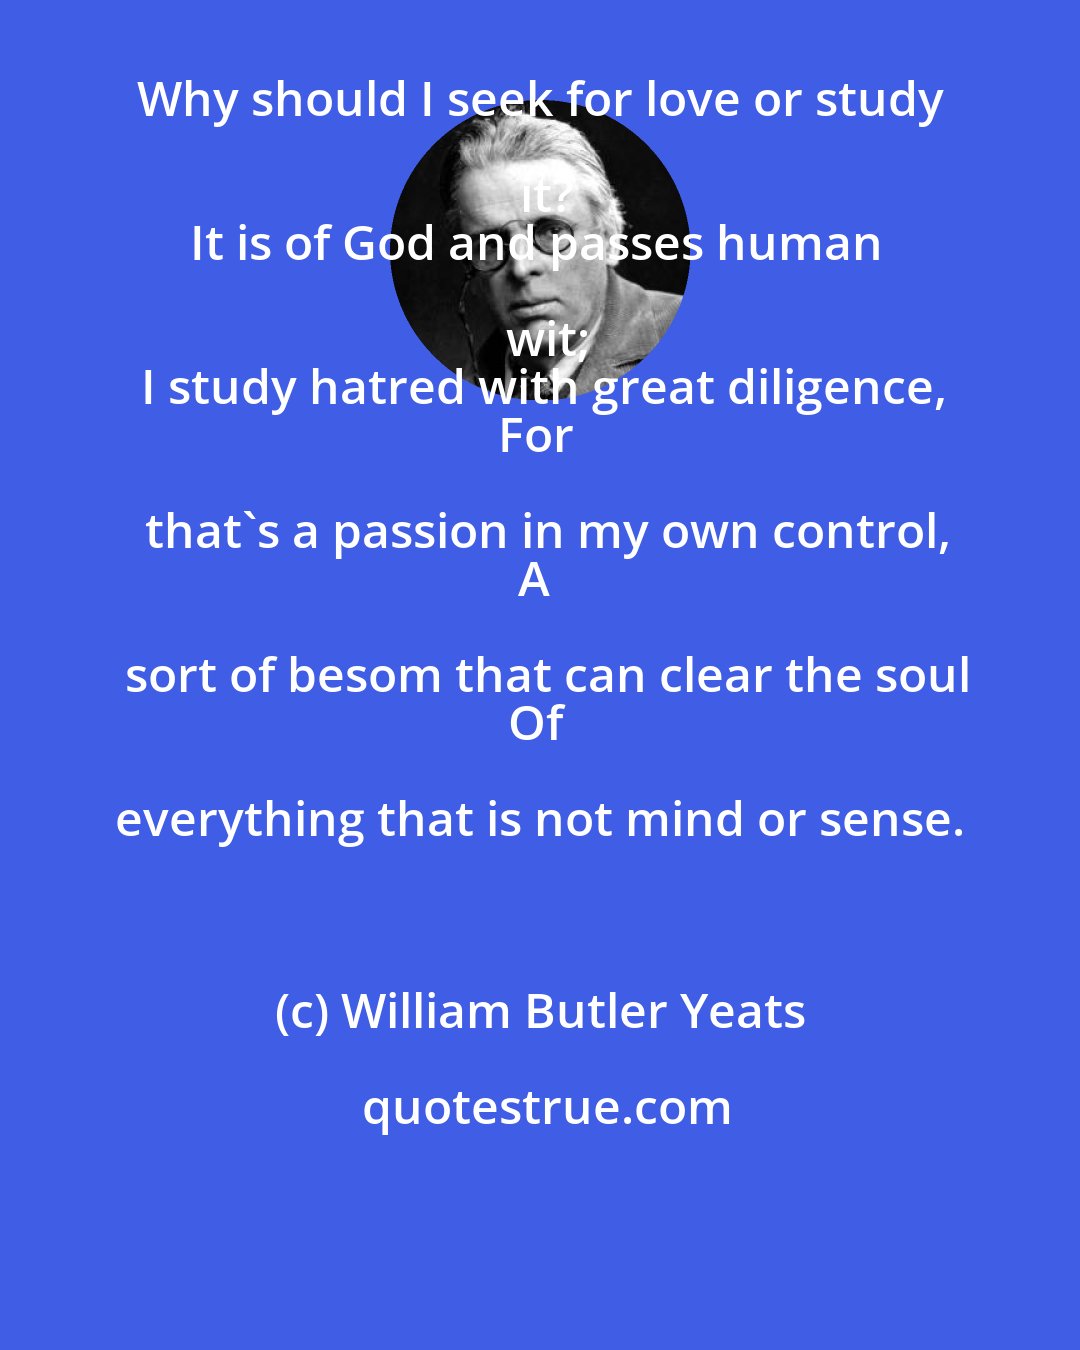 William Butler Yeats: Why should I seek for love or study it?
It is of God and passes human wit;
I study hatred with great diligence,
For that's a passion in my own control,
A sort of besom that can clear the soul
Of everything that is not mind or sense.